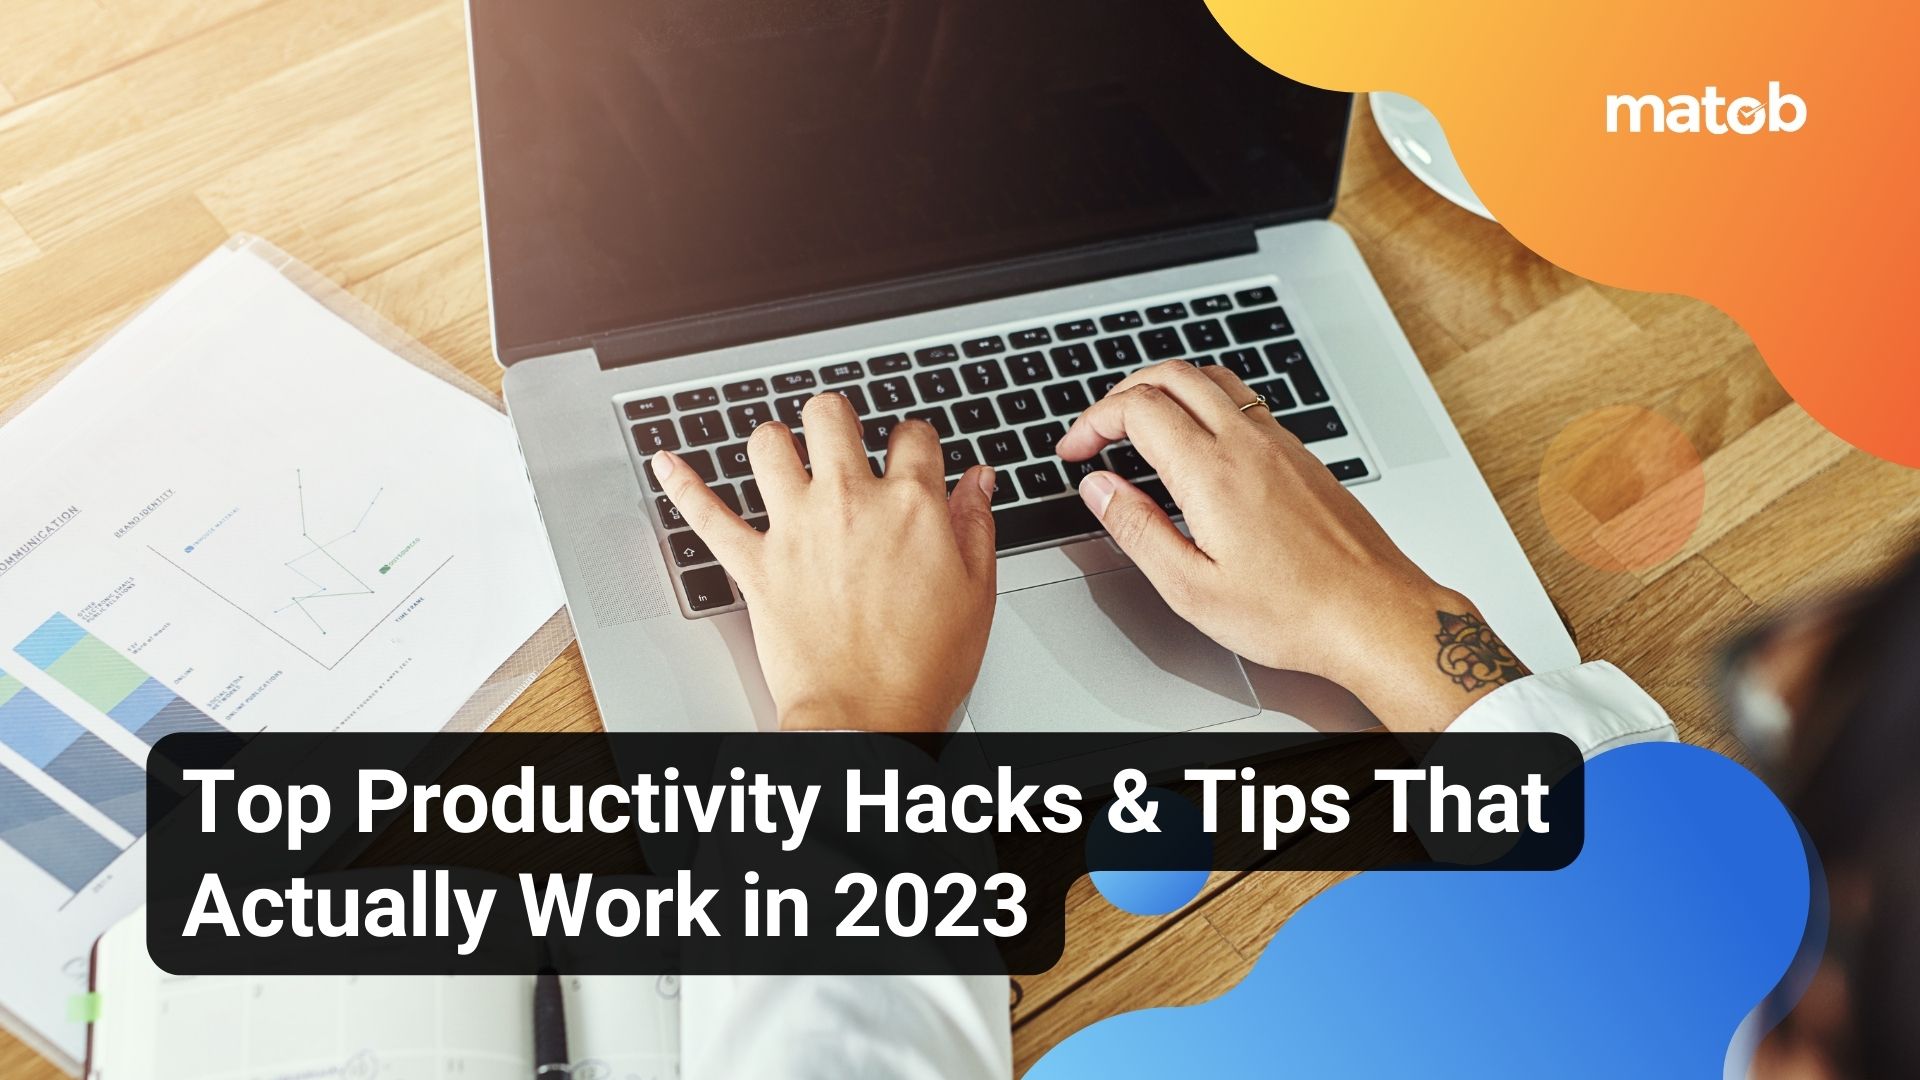 Top Productivity Hacks & Tips That Actually Work in 2023